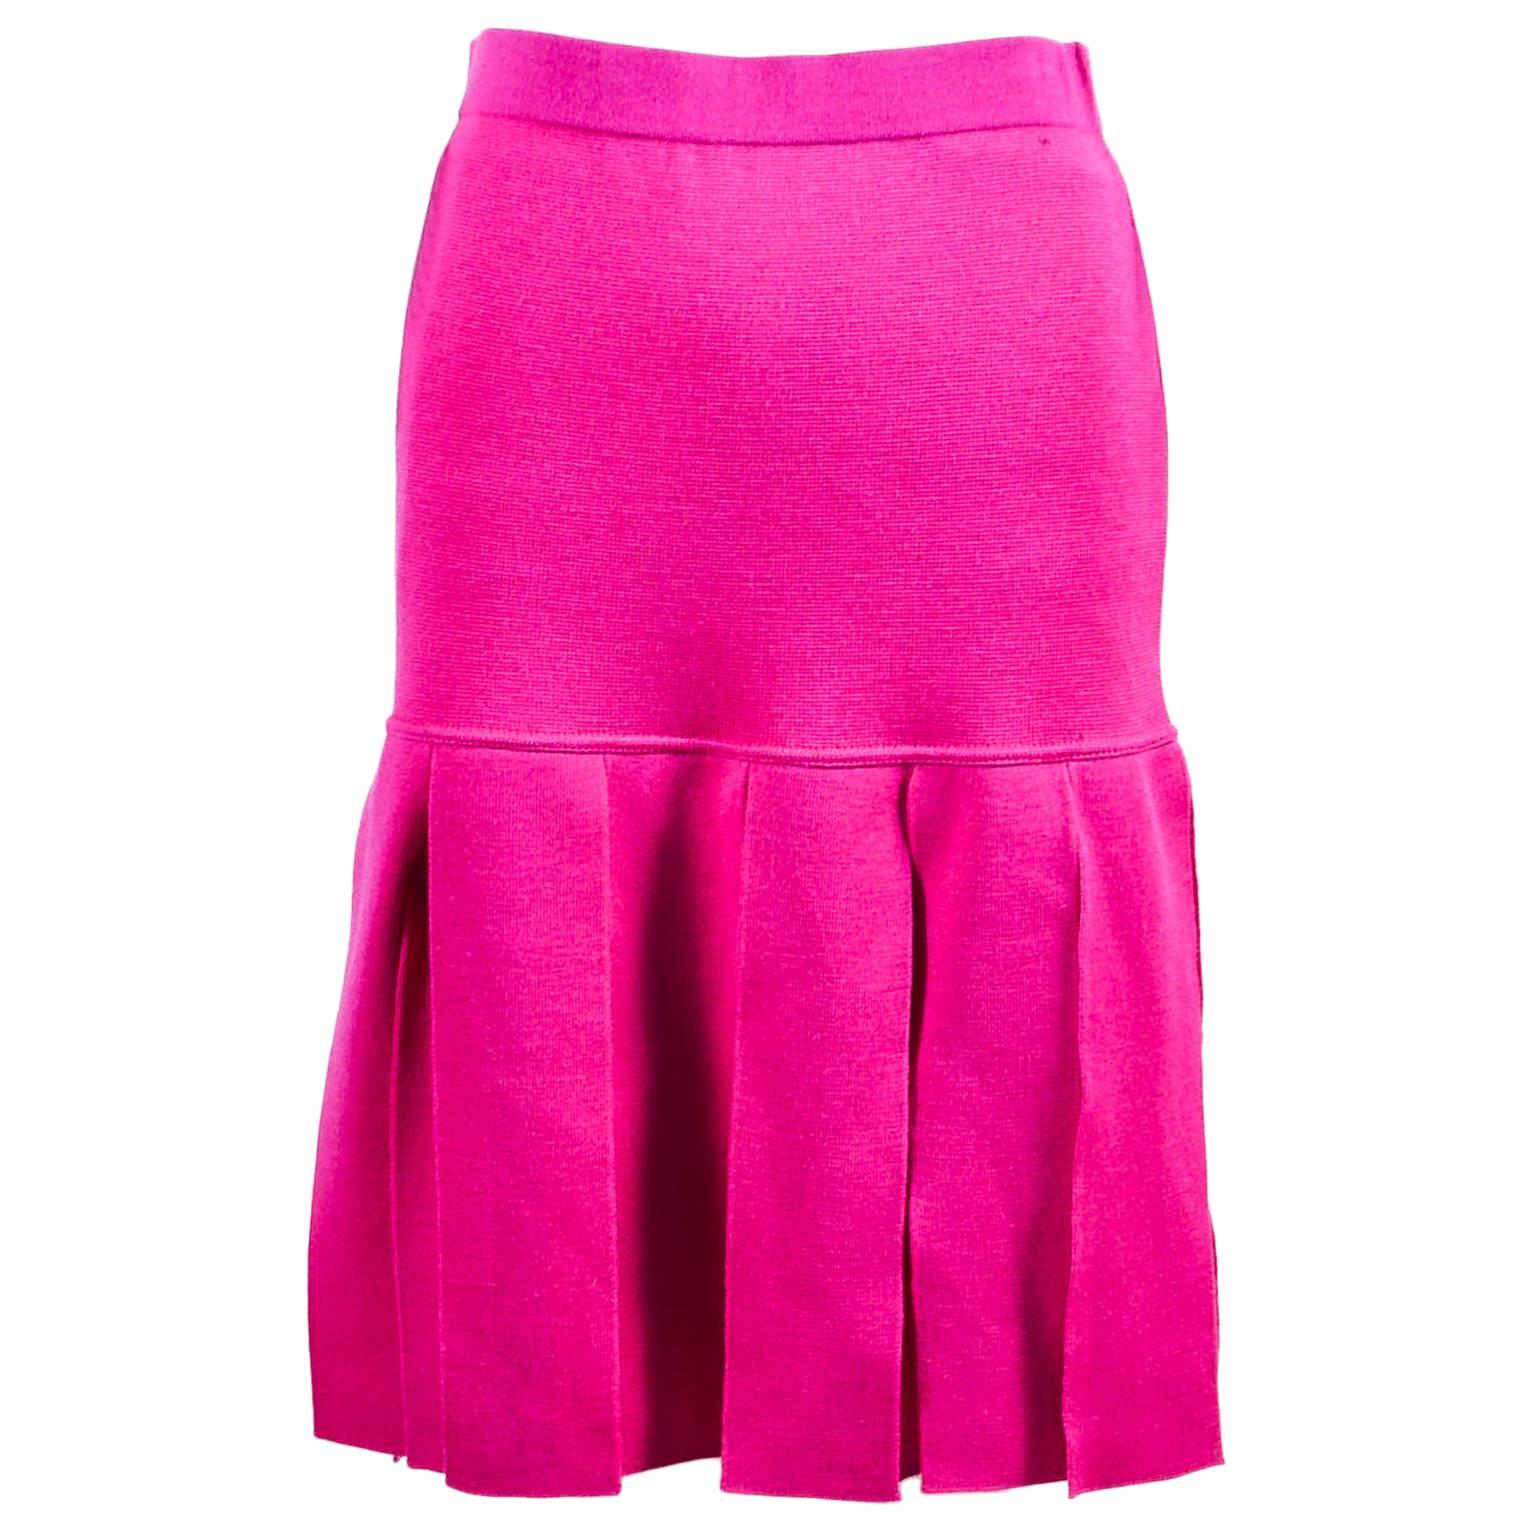 Vintage Chanel Boutique Magenta Pink Wool Knit Pleated Knee Length Skirt SZ 40 For Sale